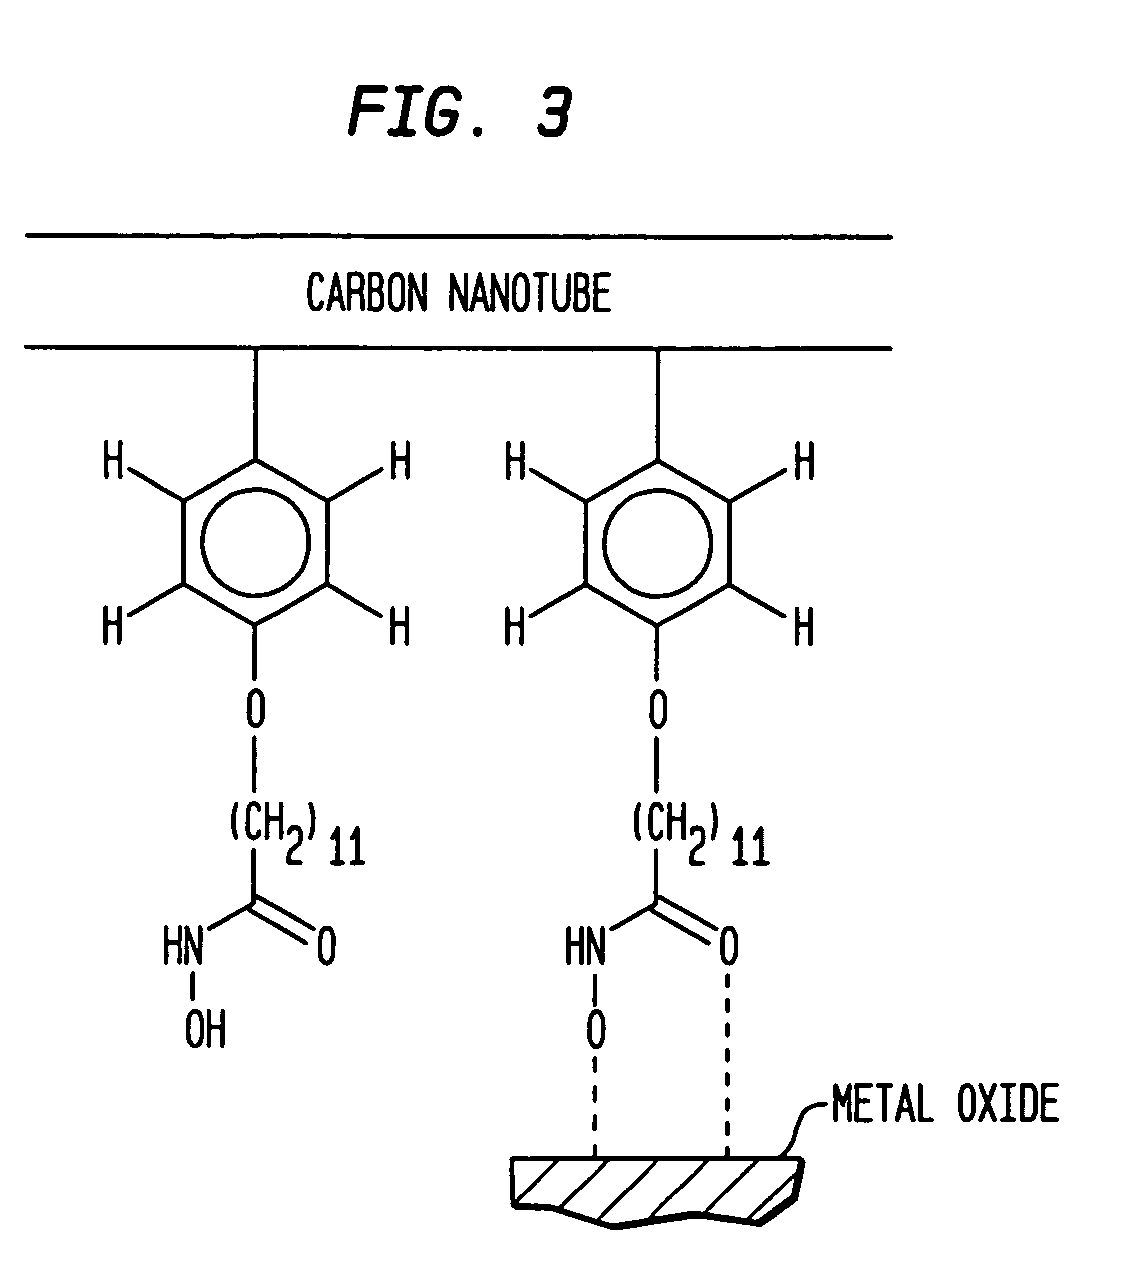 Selective placement of carbon nanotubes through functionalization